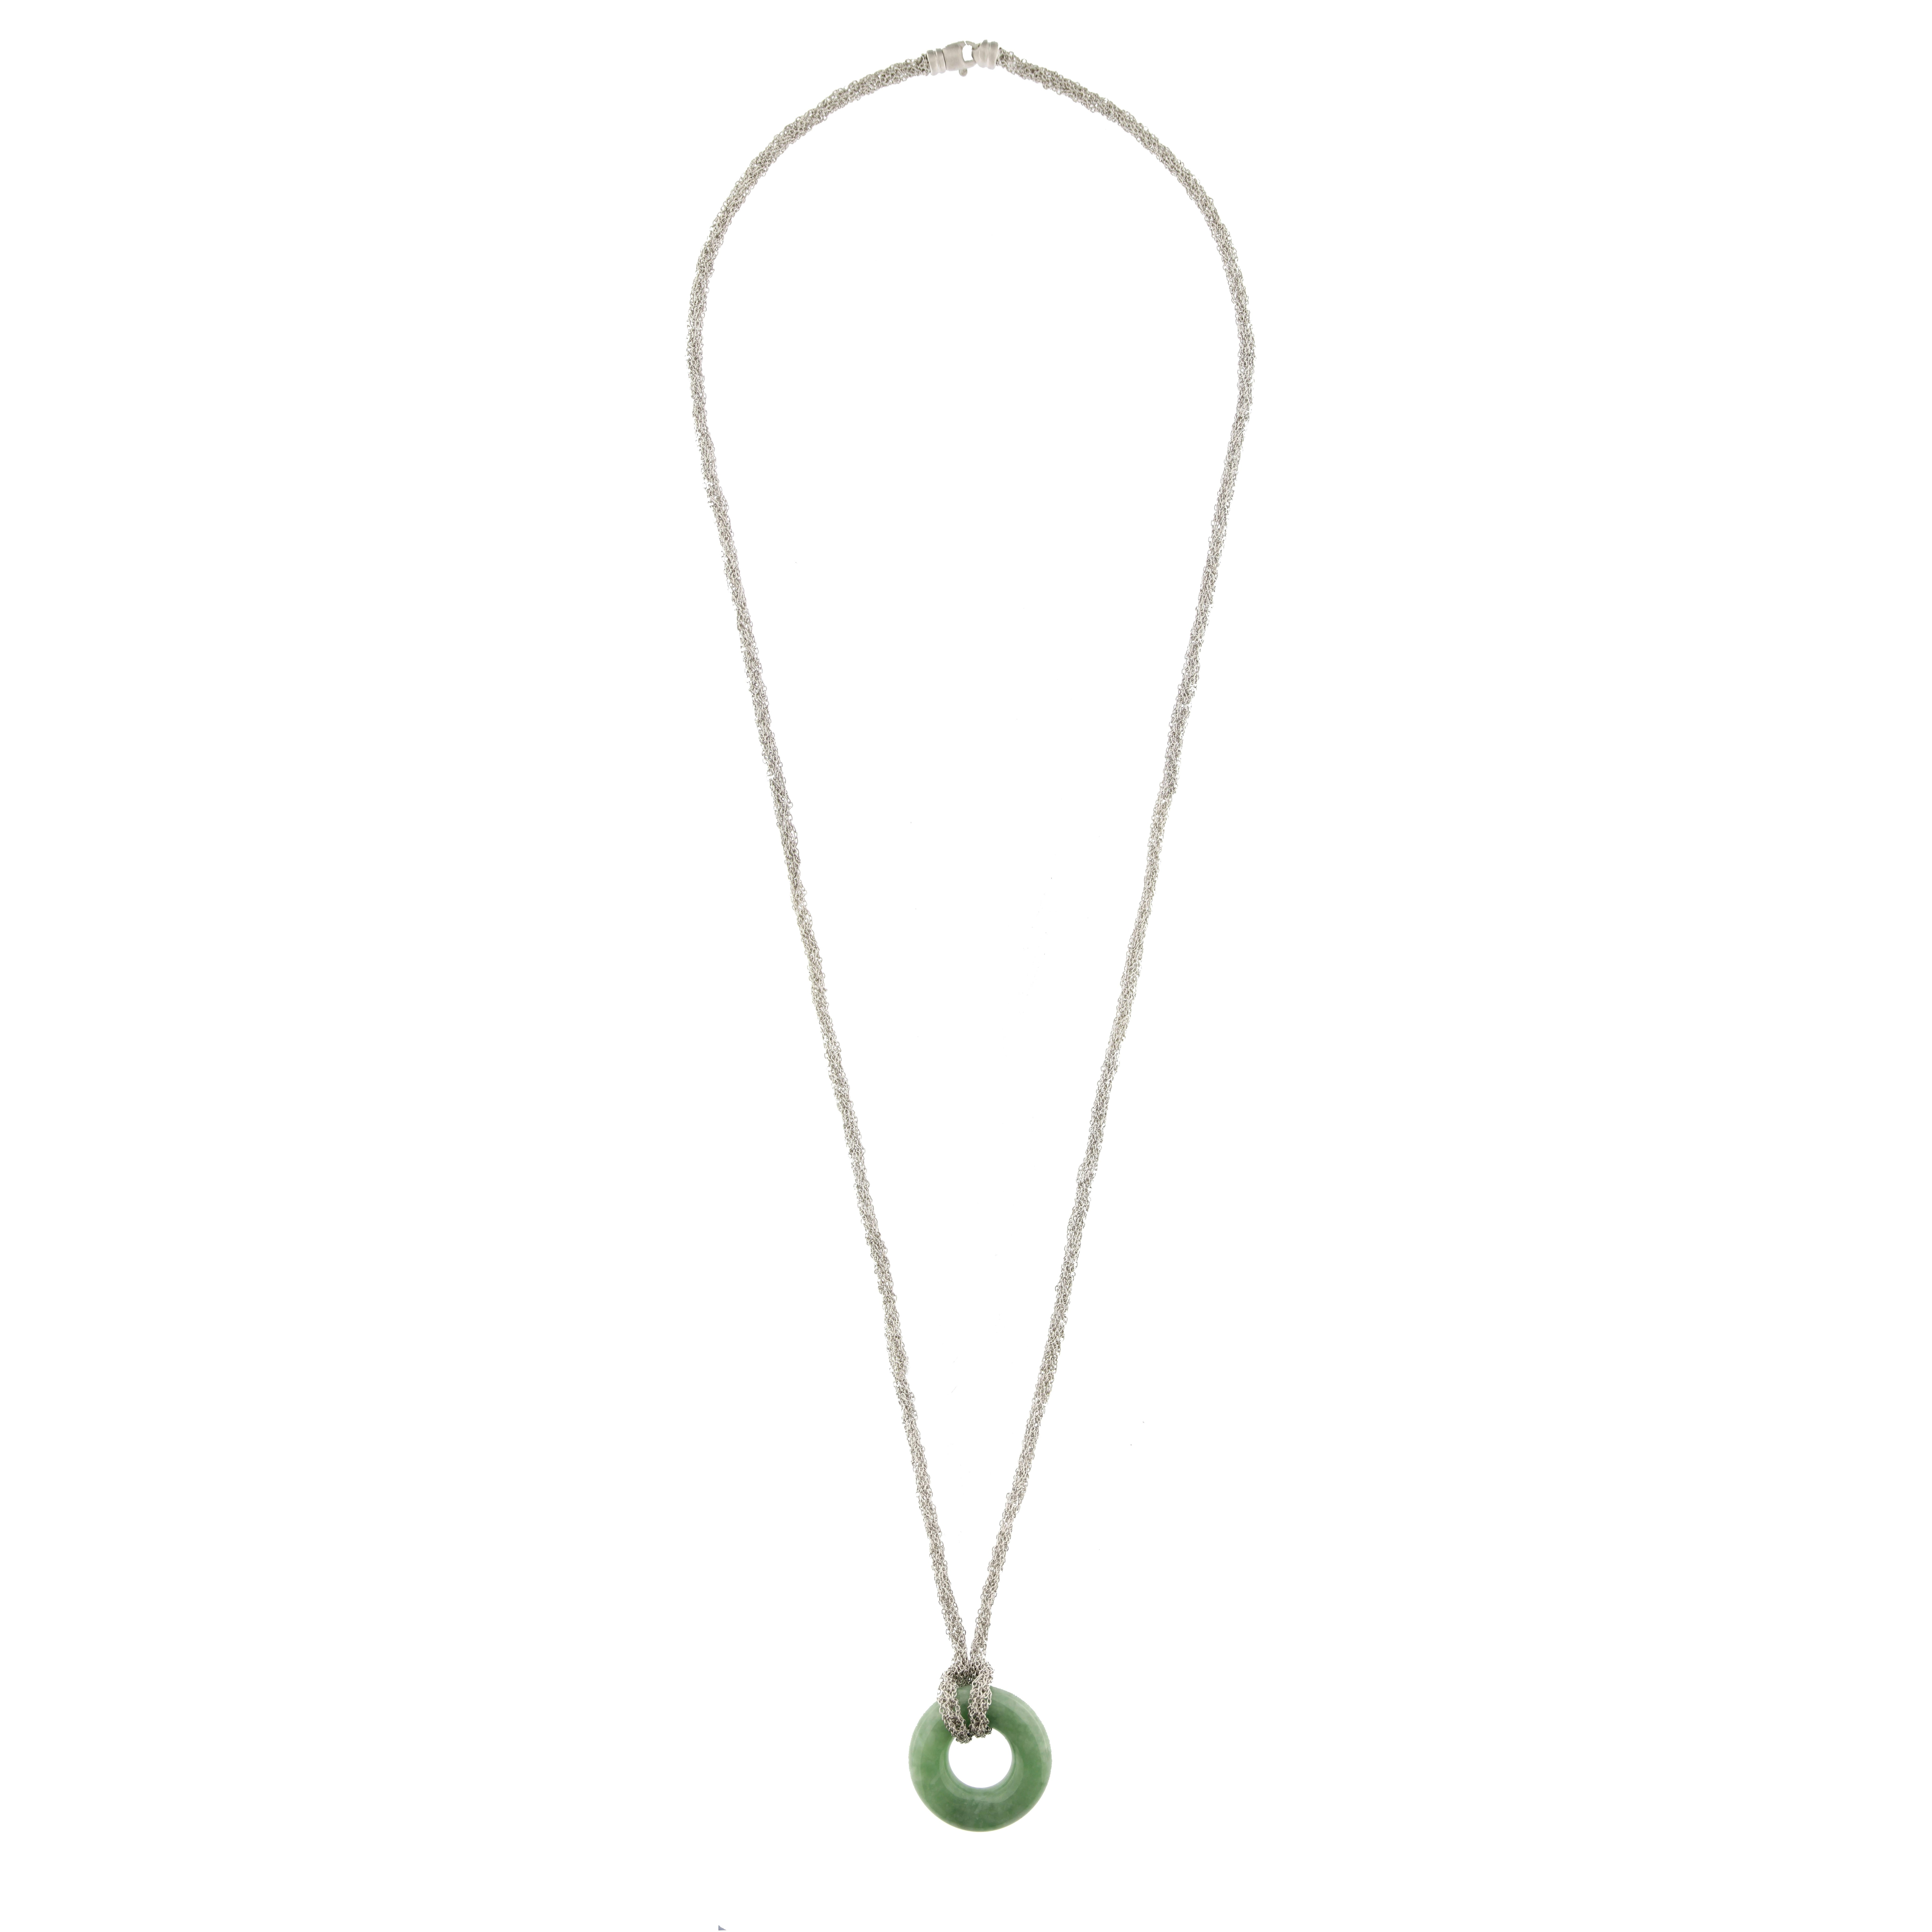 Jona design collection jade disc pendant on a woven sterling silver chain necklace.
Chain lenght: 90 cm/35 in. Disc esternal diameter: 1.30 in. 

All Jona jewelry is new and has never been previously owned or worn.